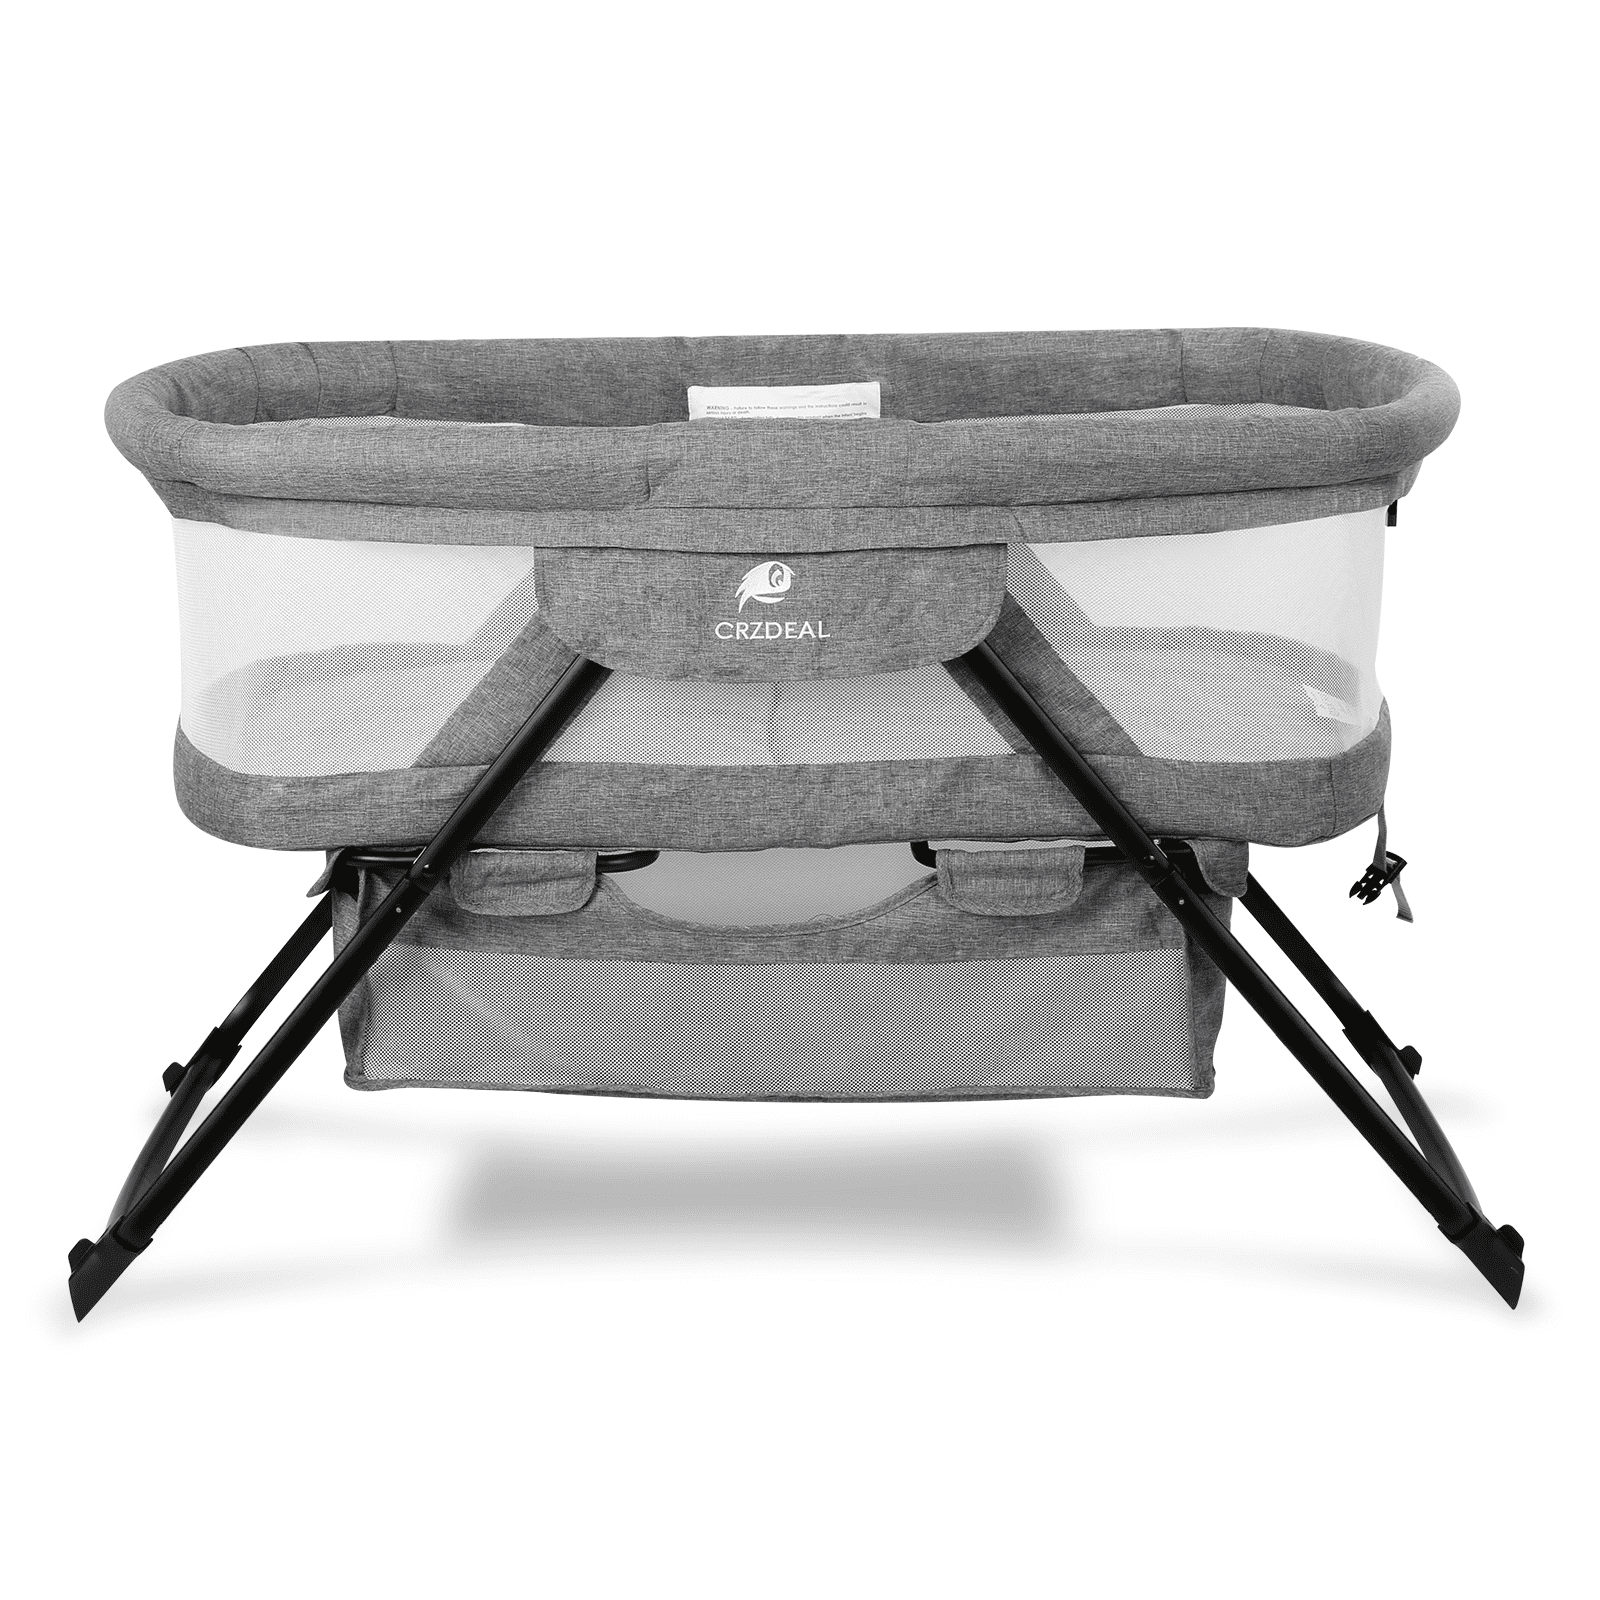 Crzdeal Bassinet 2-in-1 Fold Bassinet for Baby Stationary & Rock Portable Beside Sleeper for Baby (Gray, Applicable for 0-6 month